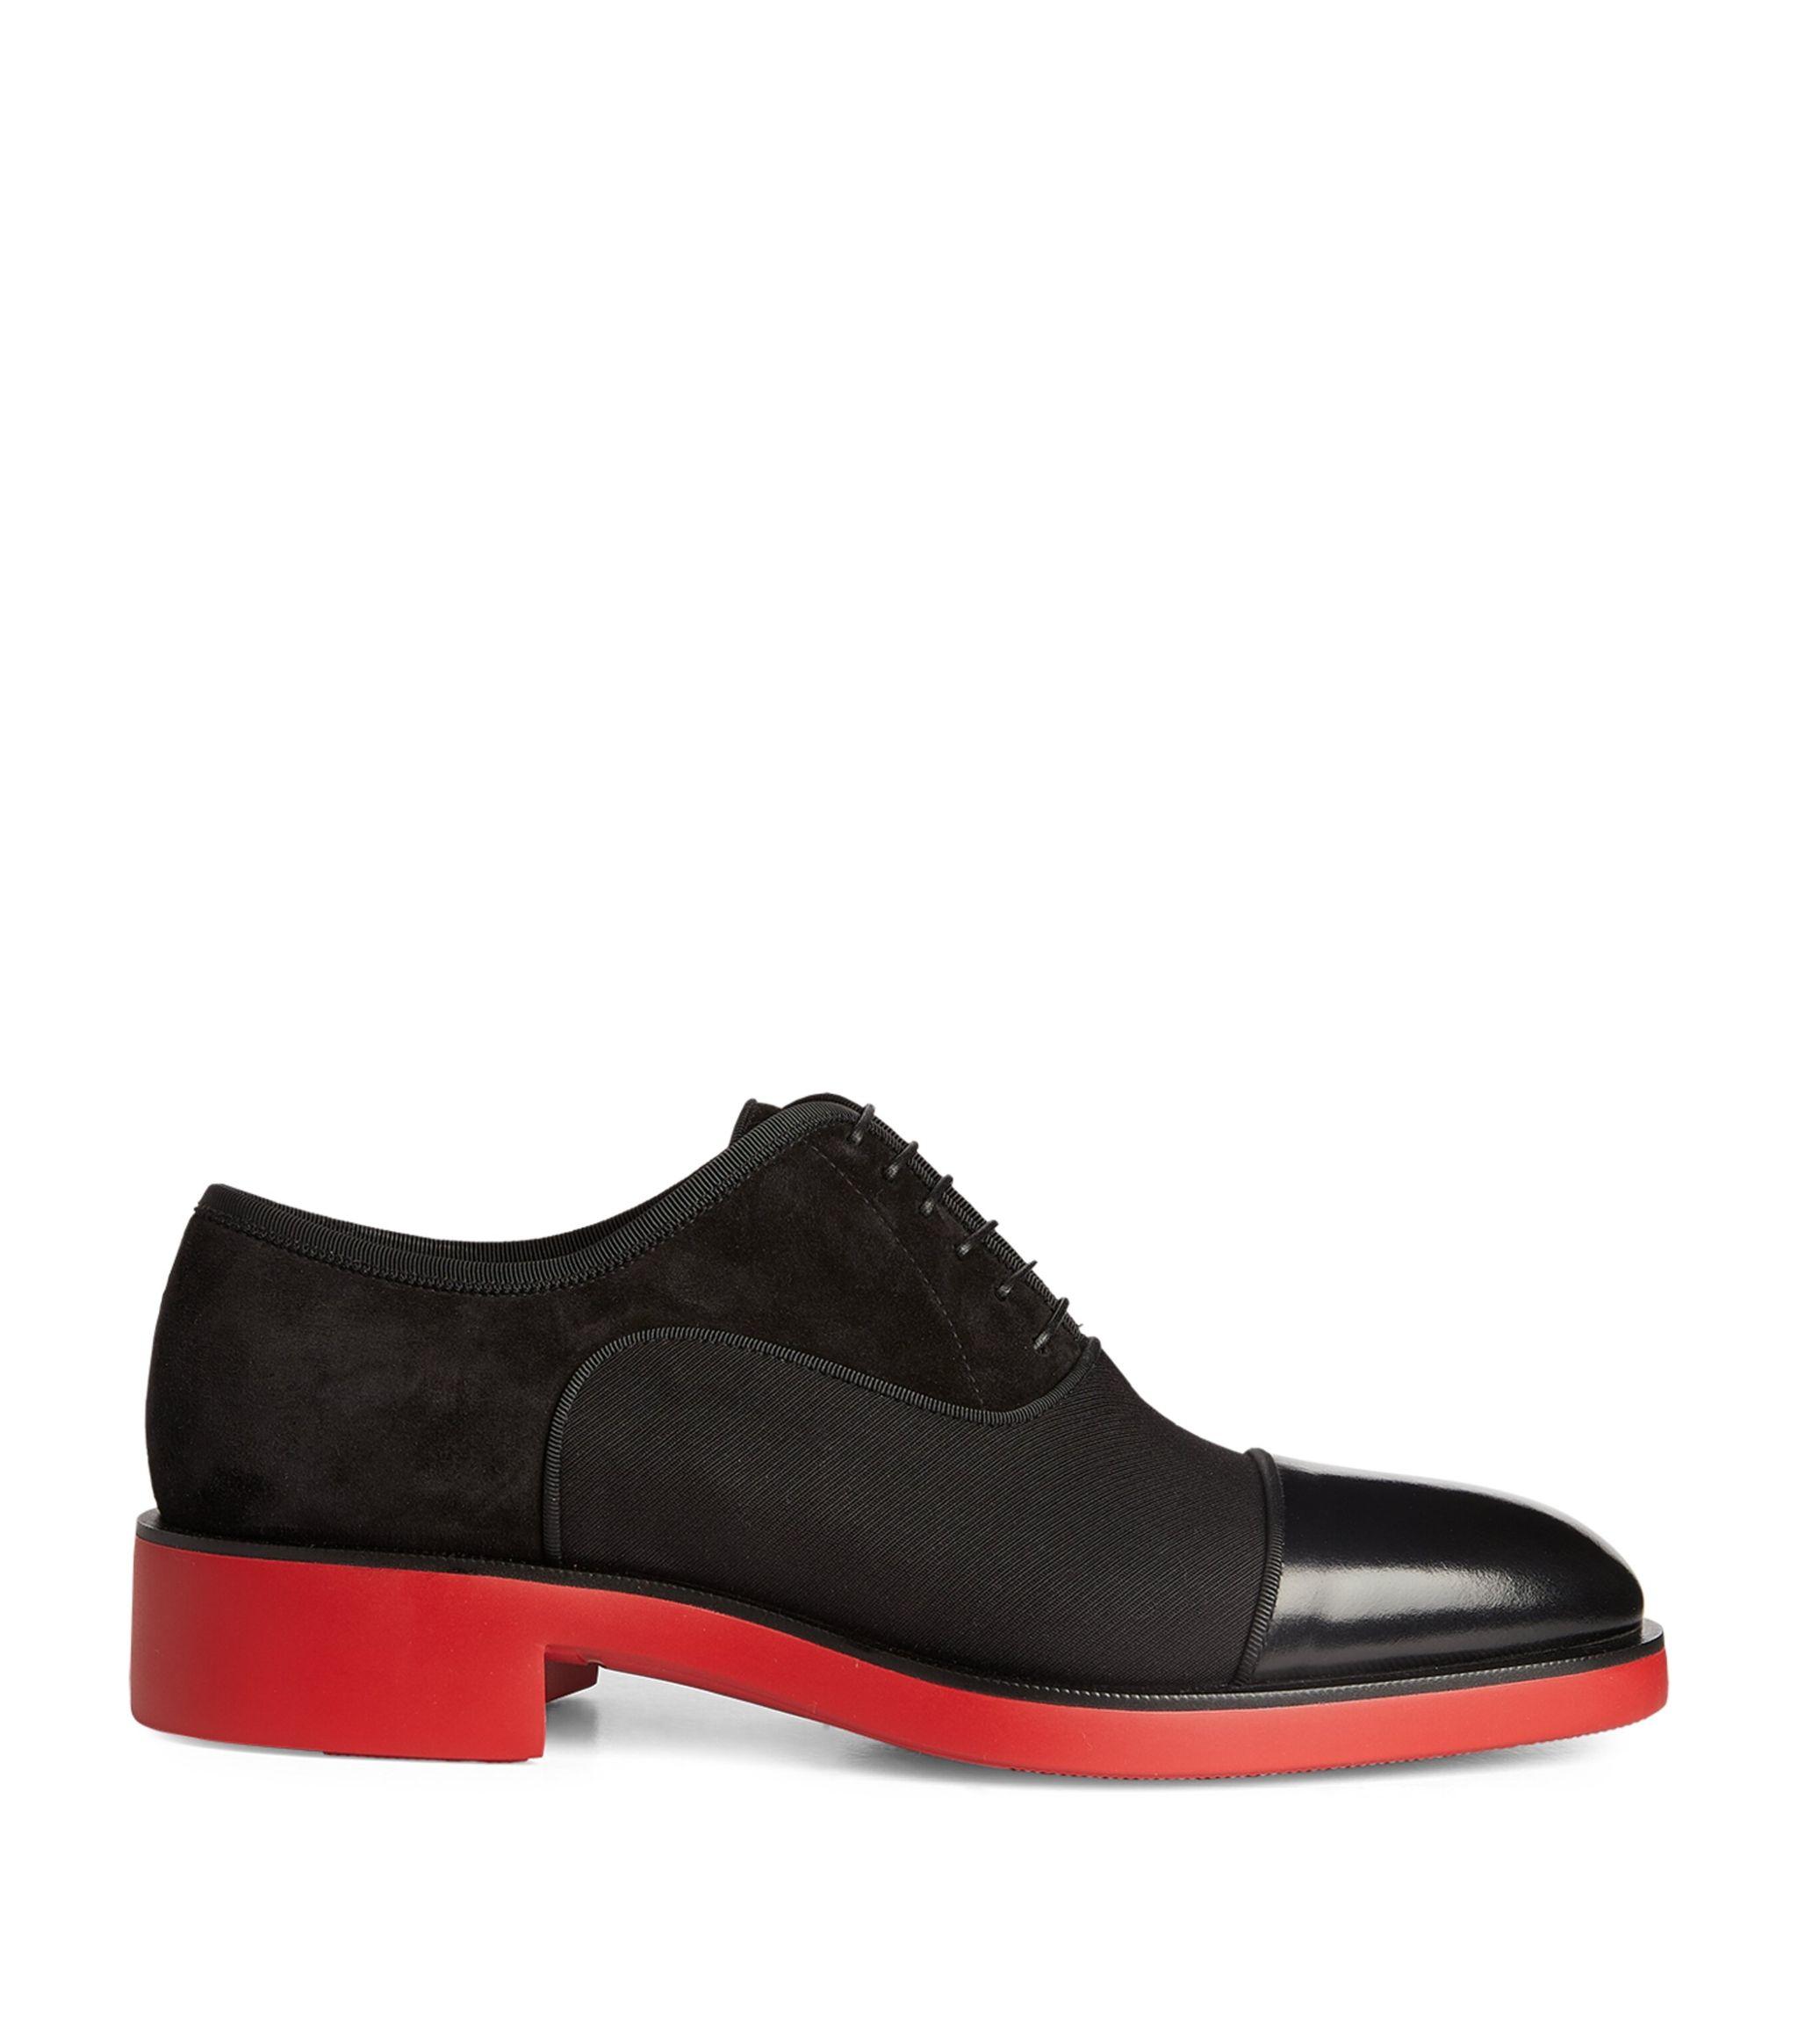 Christian Louboutin Grecco Leather Oxford Dress Shoes In Black